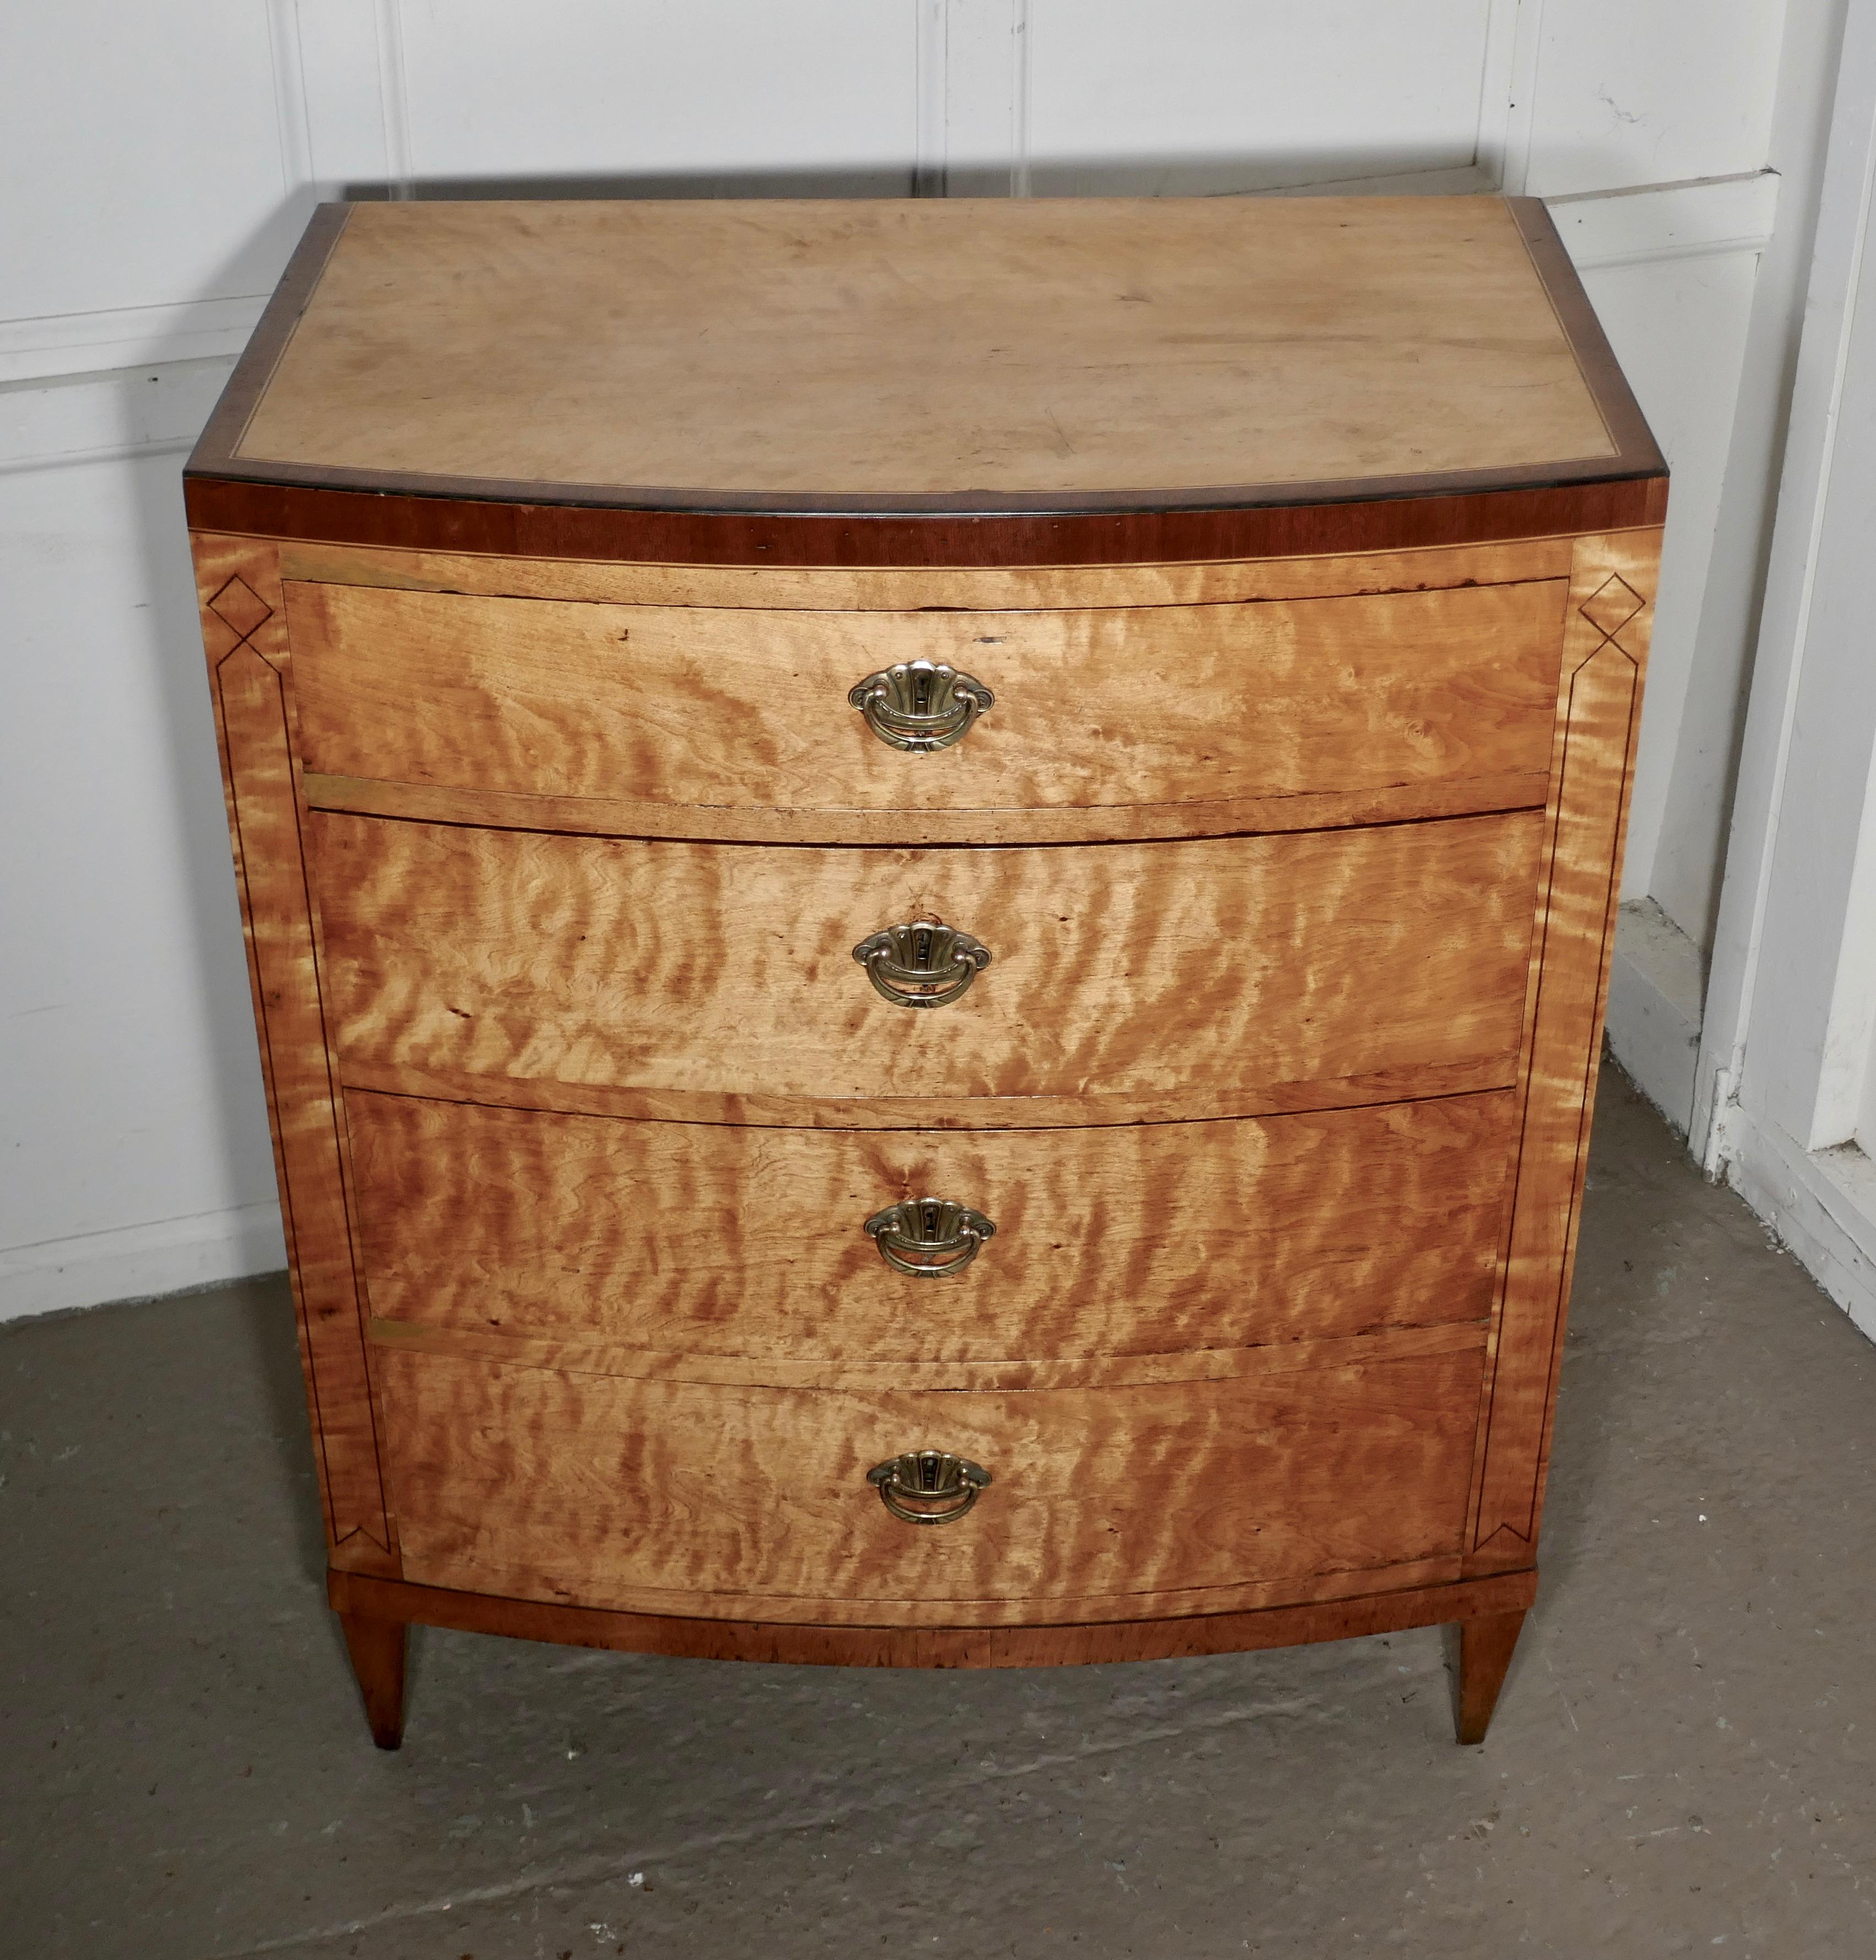 Art Deco 4 drawer bow front chest of drawers in bird’s-eye maple

This is an elegant and stylish piece from the Art Deco period, it is made with superb matched veneers in bird’s-eye Maple with a contrasting band of mahogany and decorative Inlaid